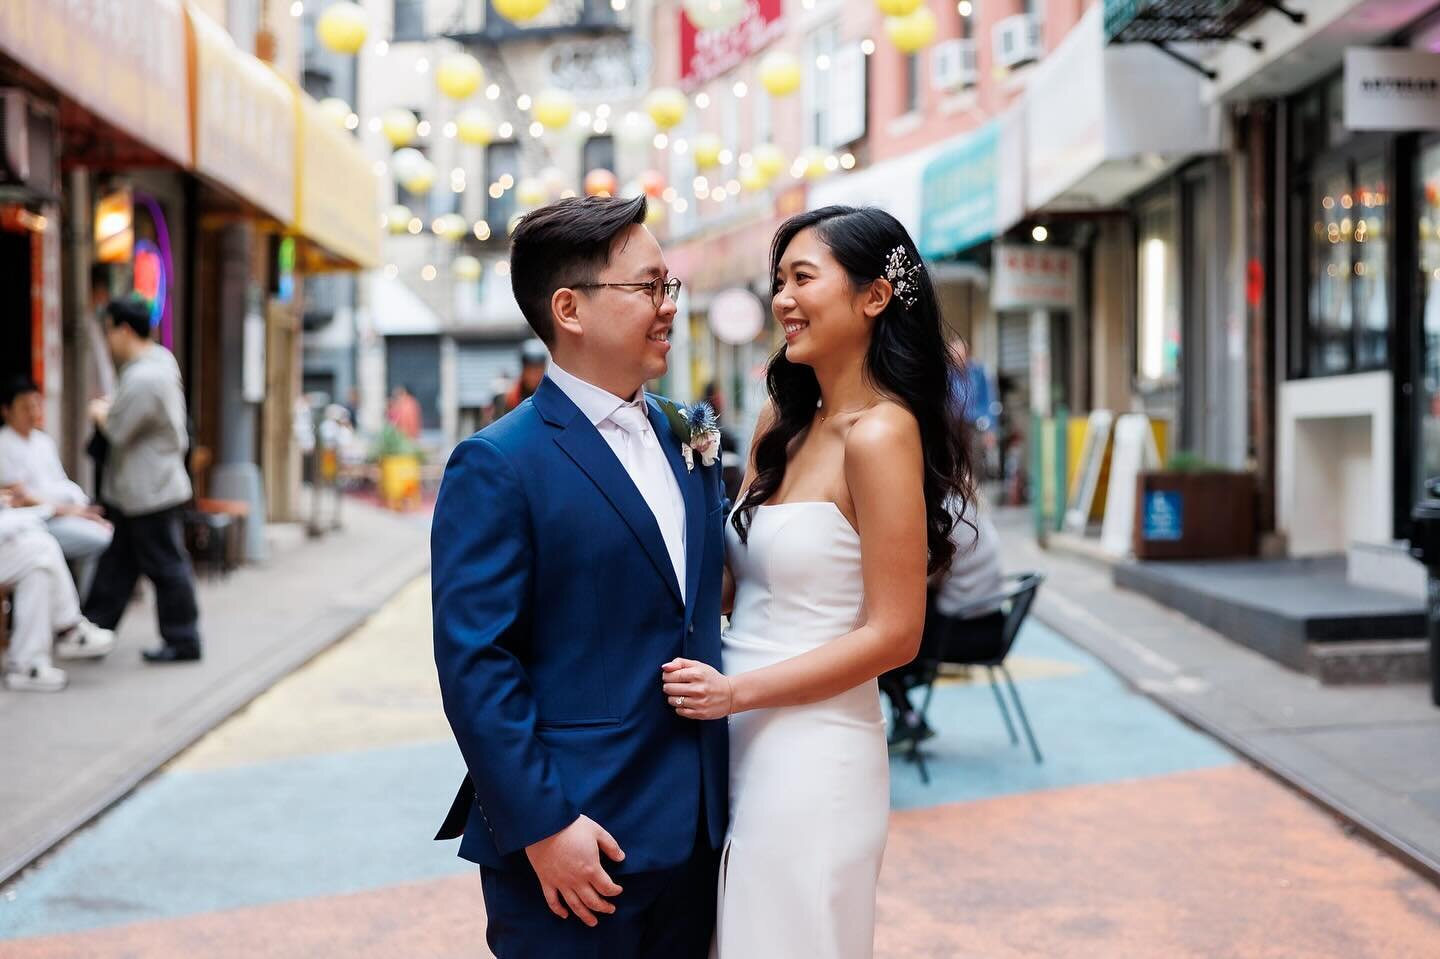 Andrew and Steph knew they didn&rsquo;t want a big, over-the-top celebration for their wedding. To keep it low-key, they decided on a city hall ceremony followed by dinner with their immediate family nearby in Chinatown. It&rsquo;s always special to 